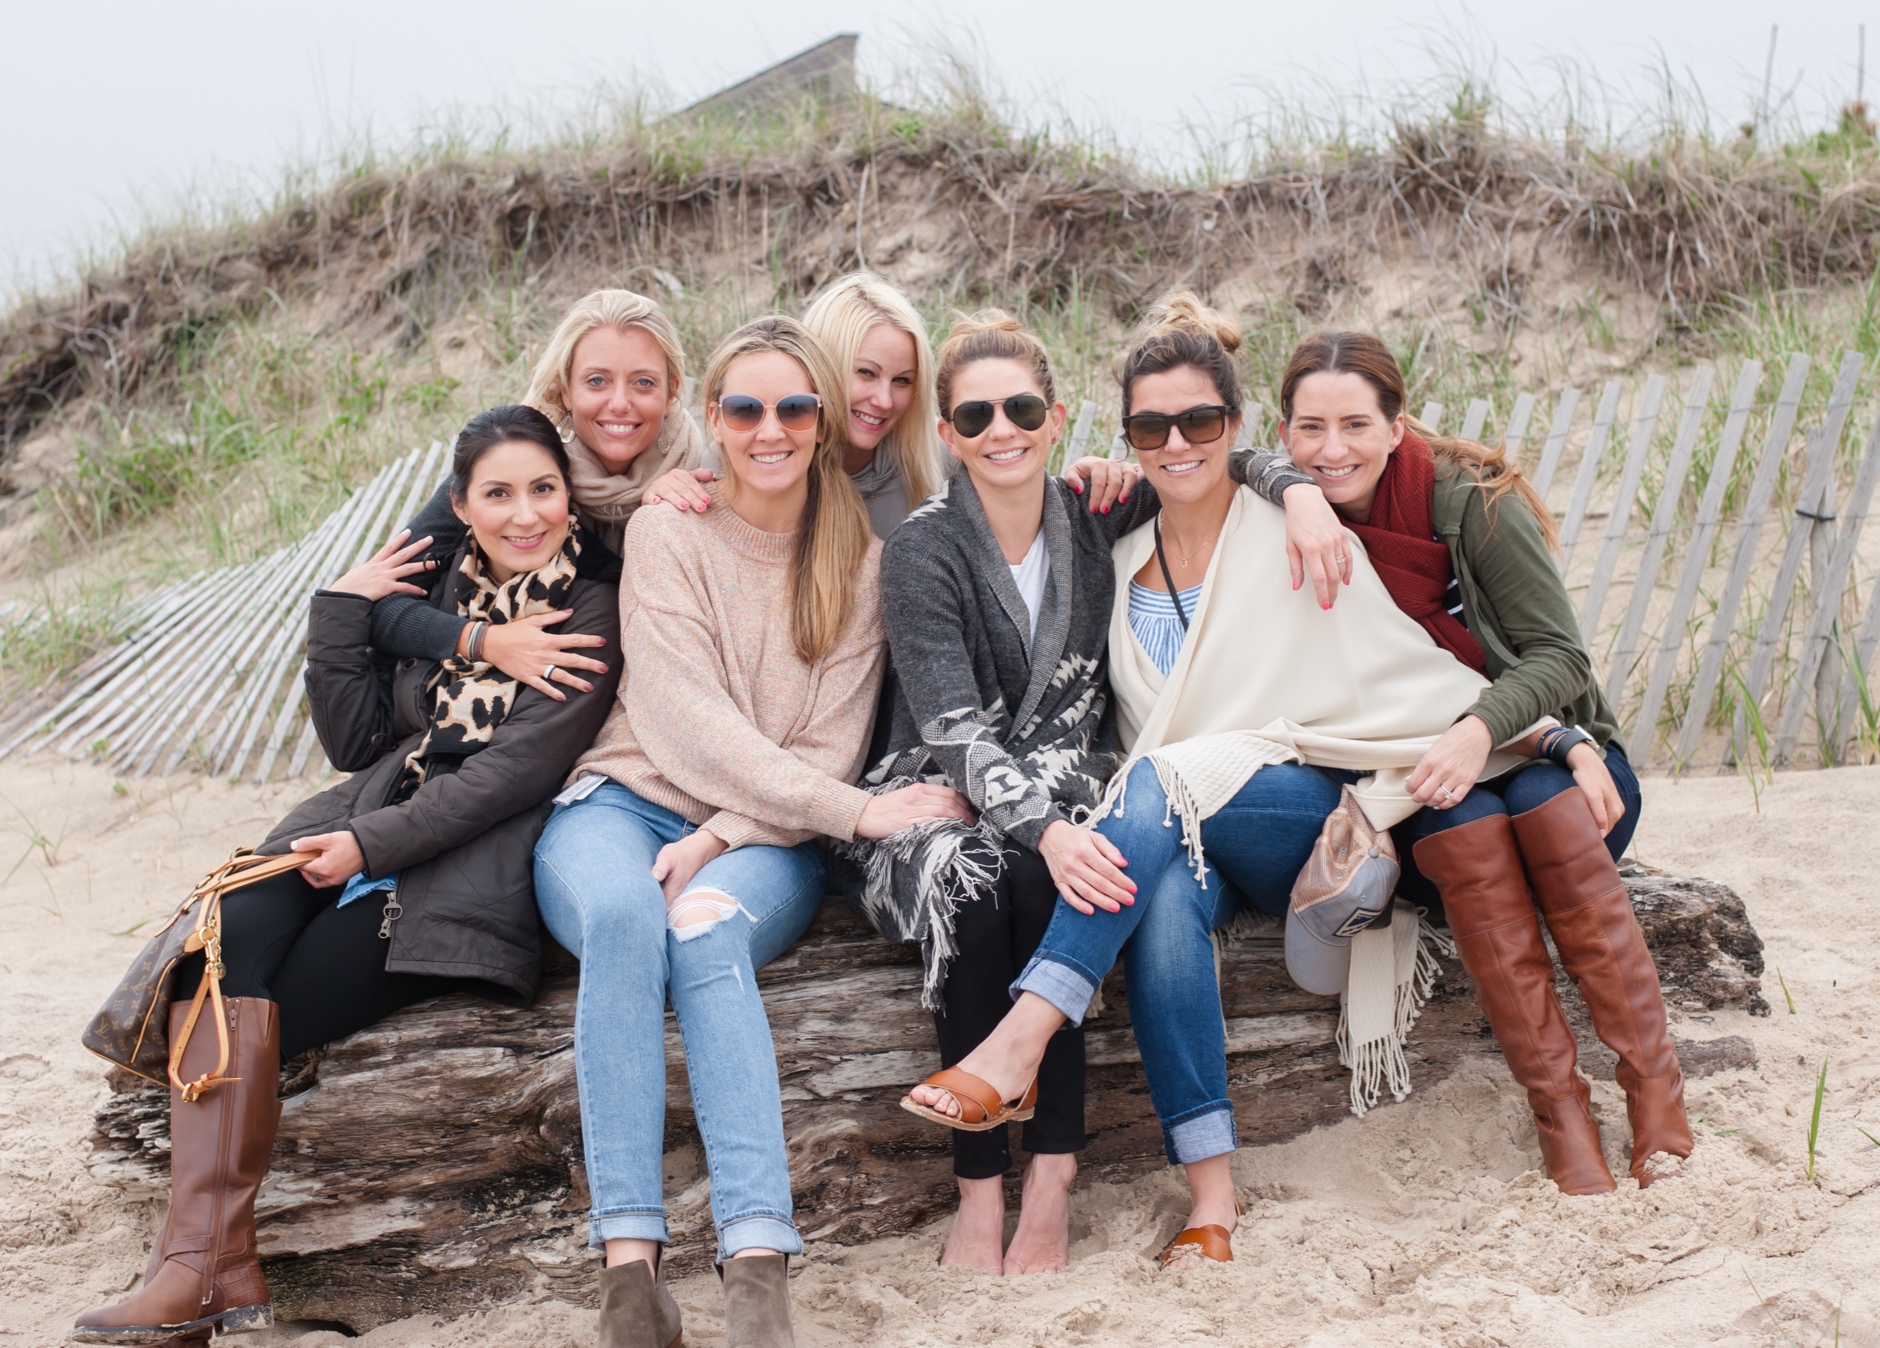 All of us on our last day - Montauk, NY